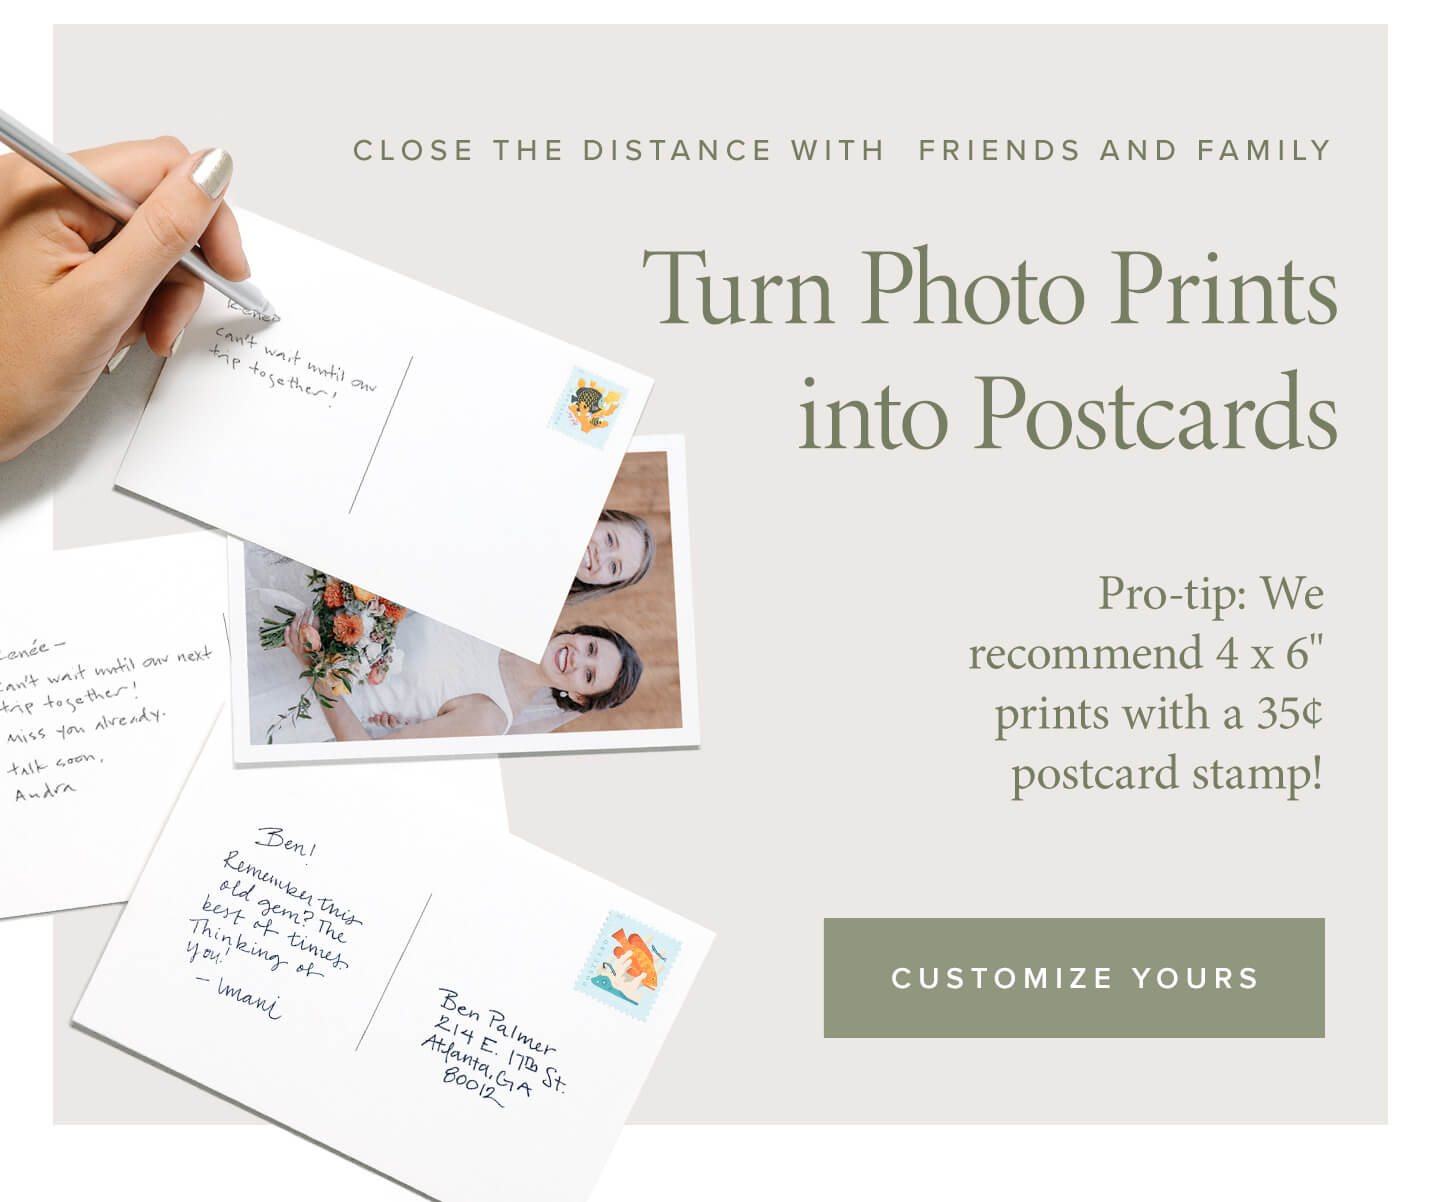 Turn Photo Prints into Postcards | Customize Yours